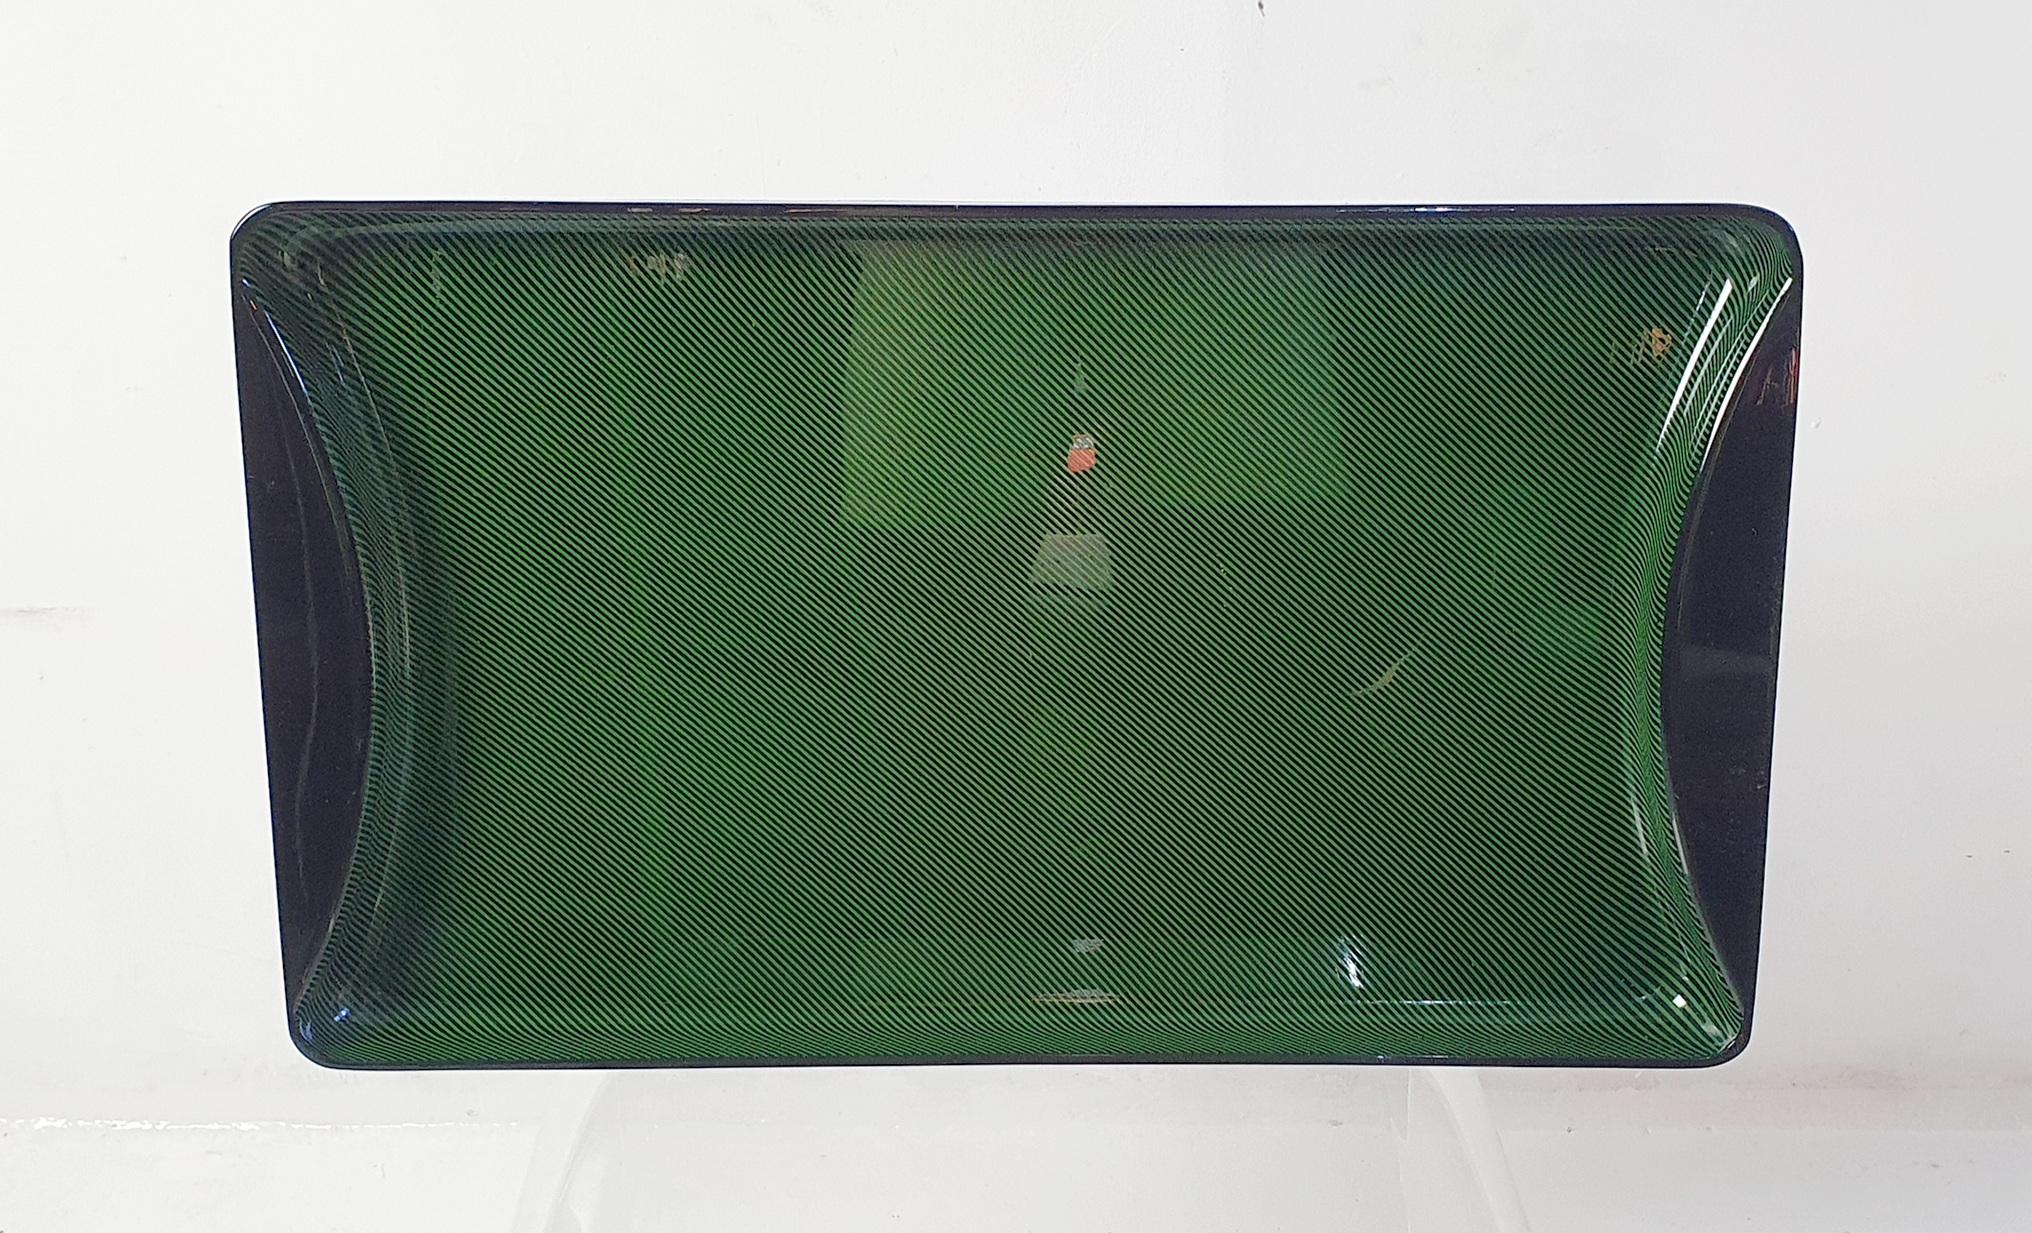 A large rectangular vintage serving tray by Guzzini Italy in lucite. The base is jet black with diagonal stripes in green. In very good condition with minor scratching.